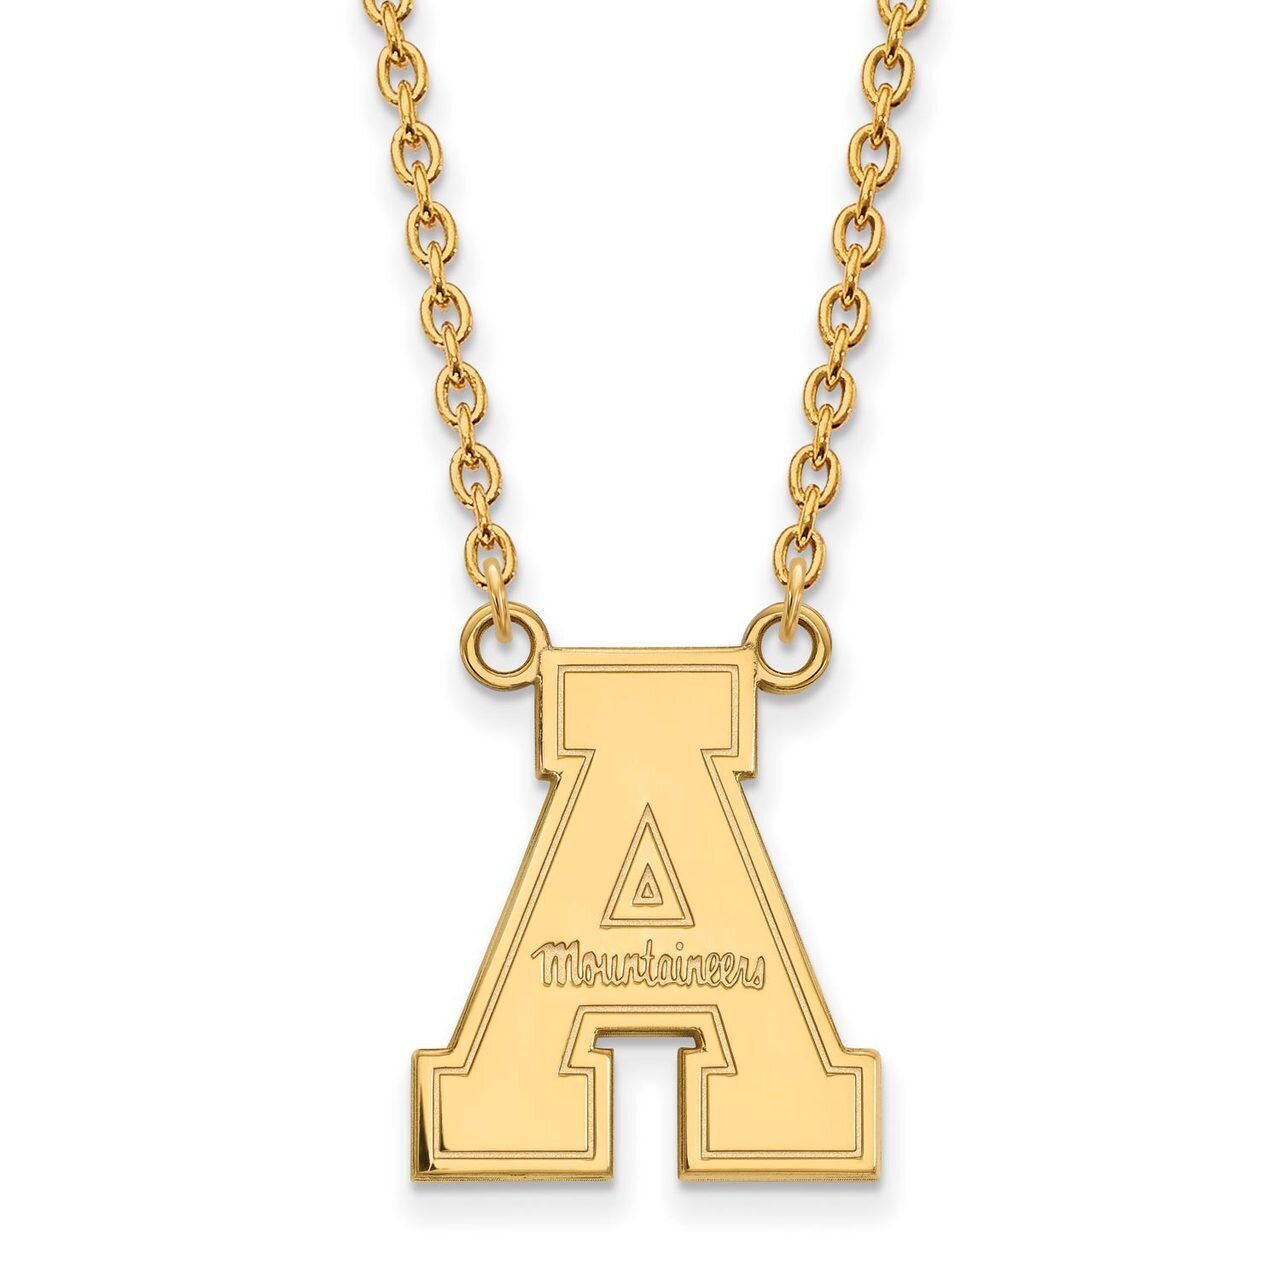 Appalachian State University Large Pendant with Chain Necklace 14k Yellow Gold 4Y012APS-18